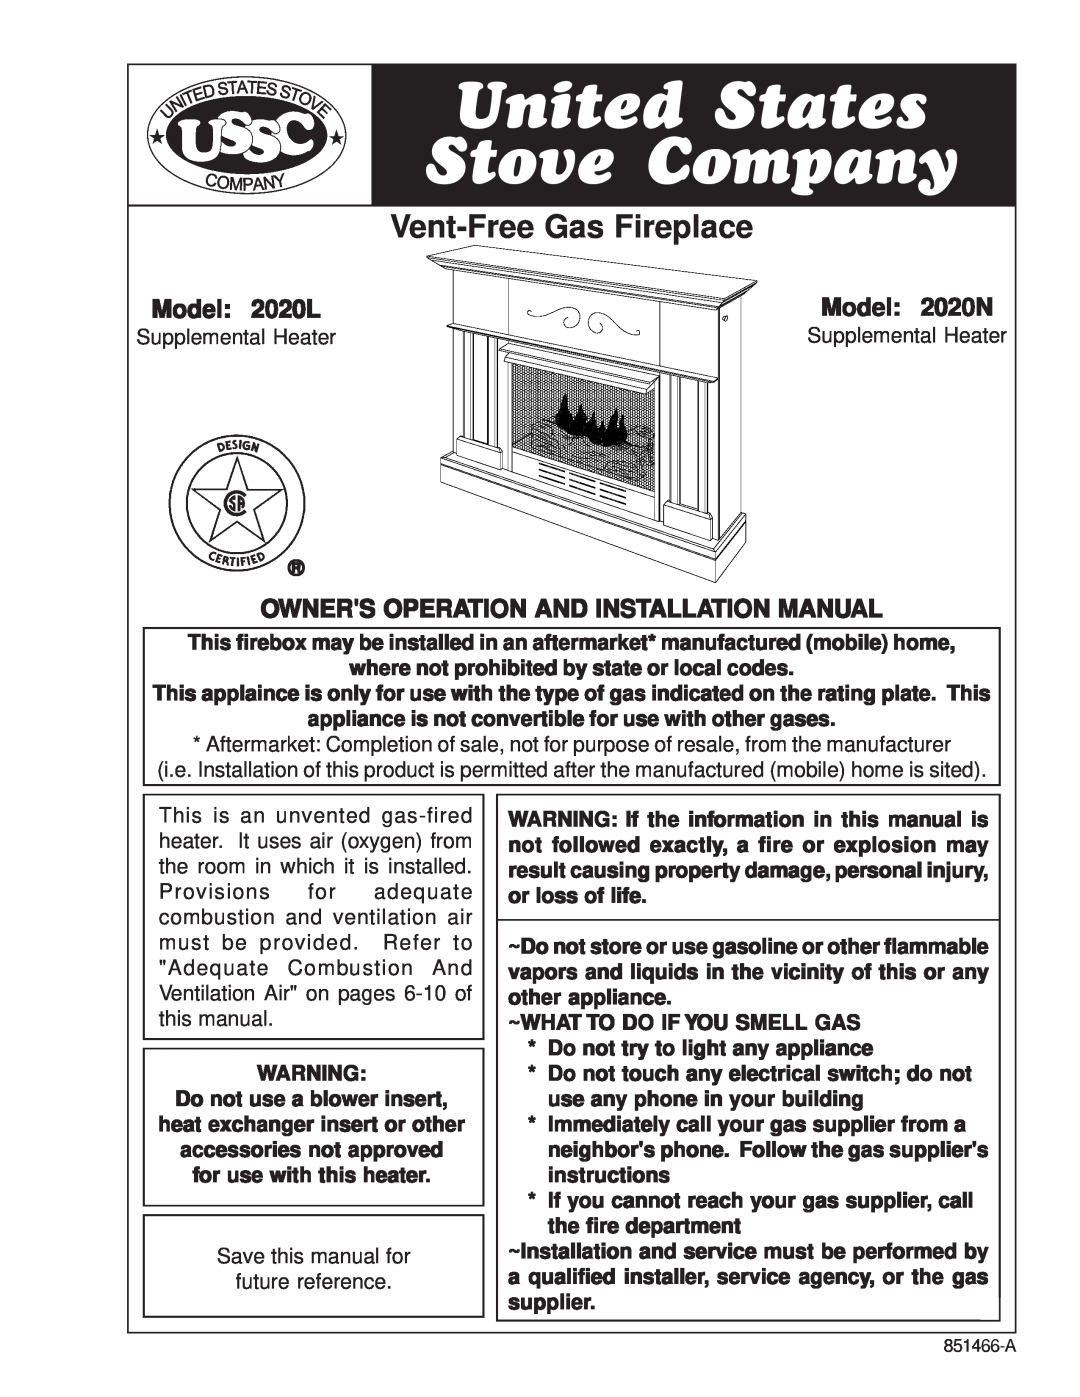 United States Stove manual Model 2020L, Model 2020N, Owners Operation And Installation Manual, Vent-FreeGas Fireplace 